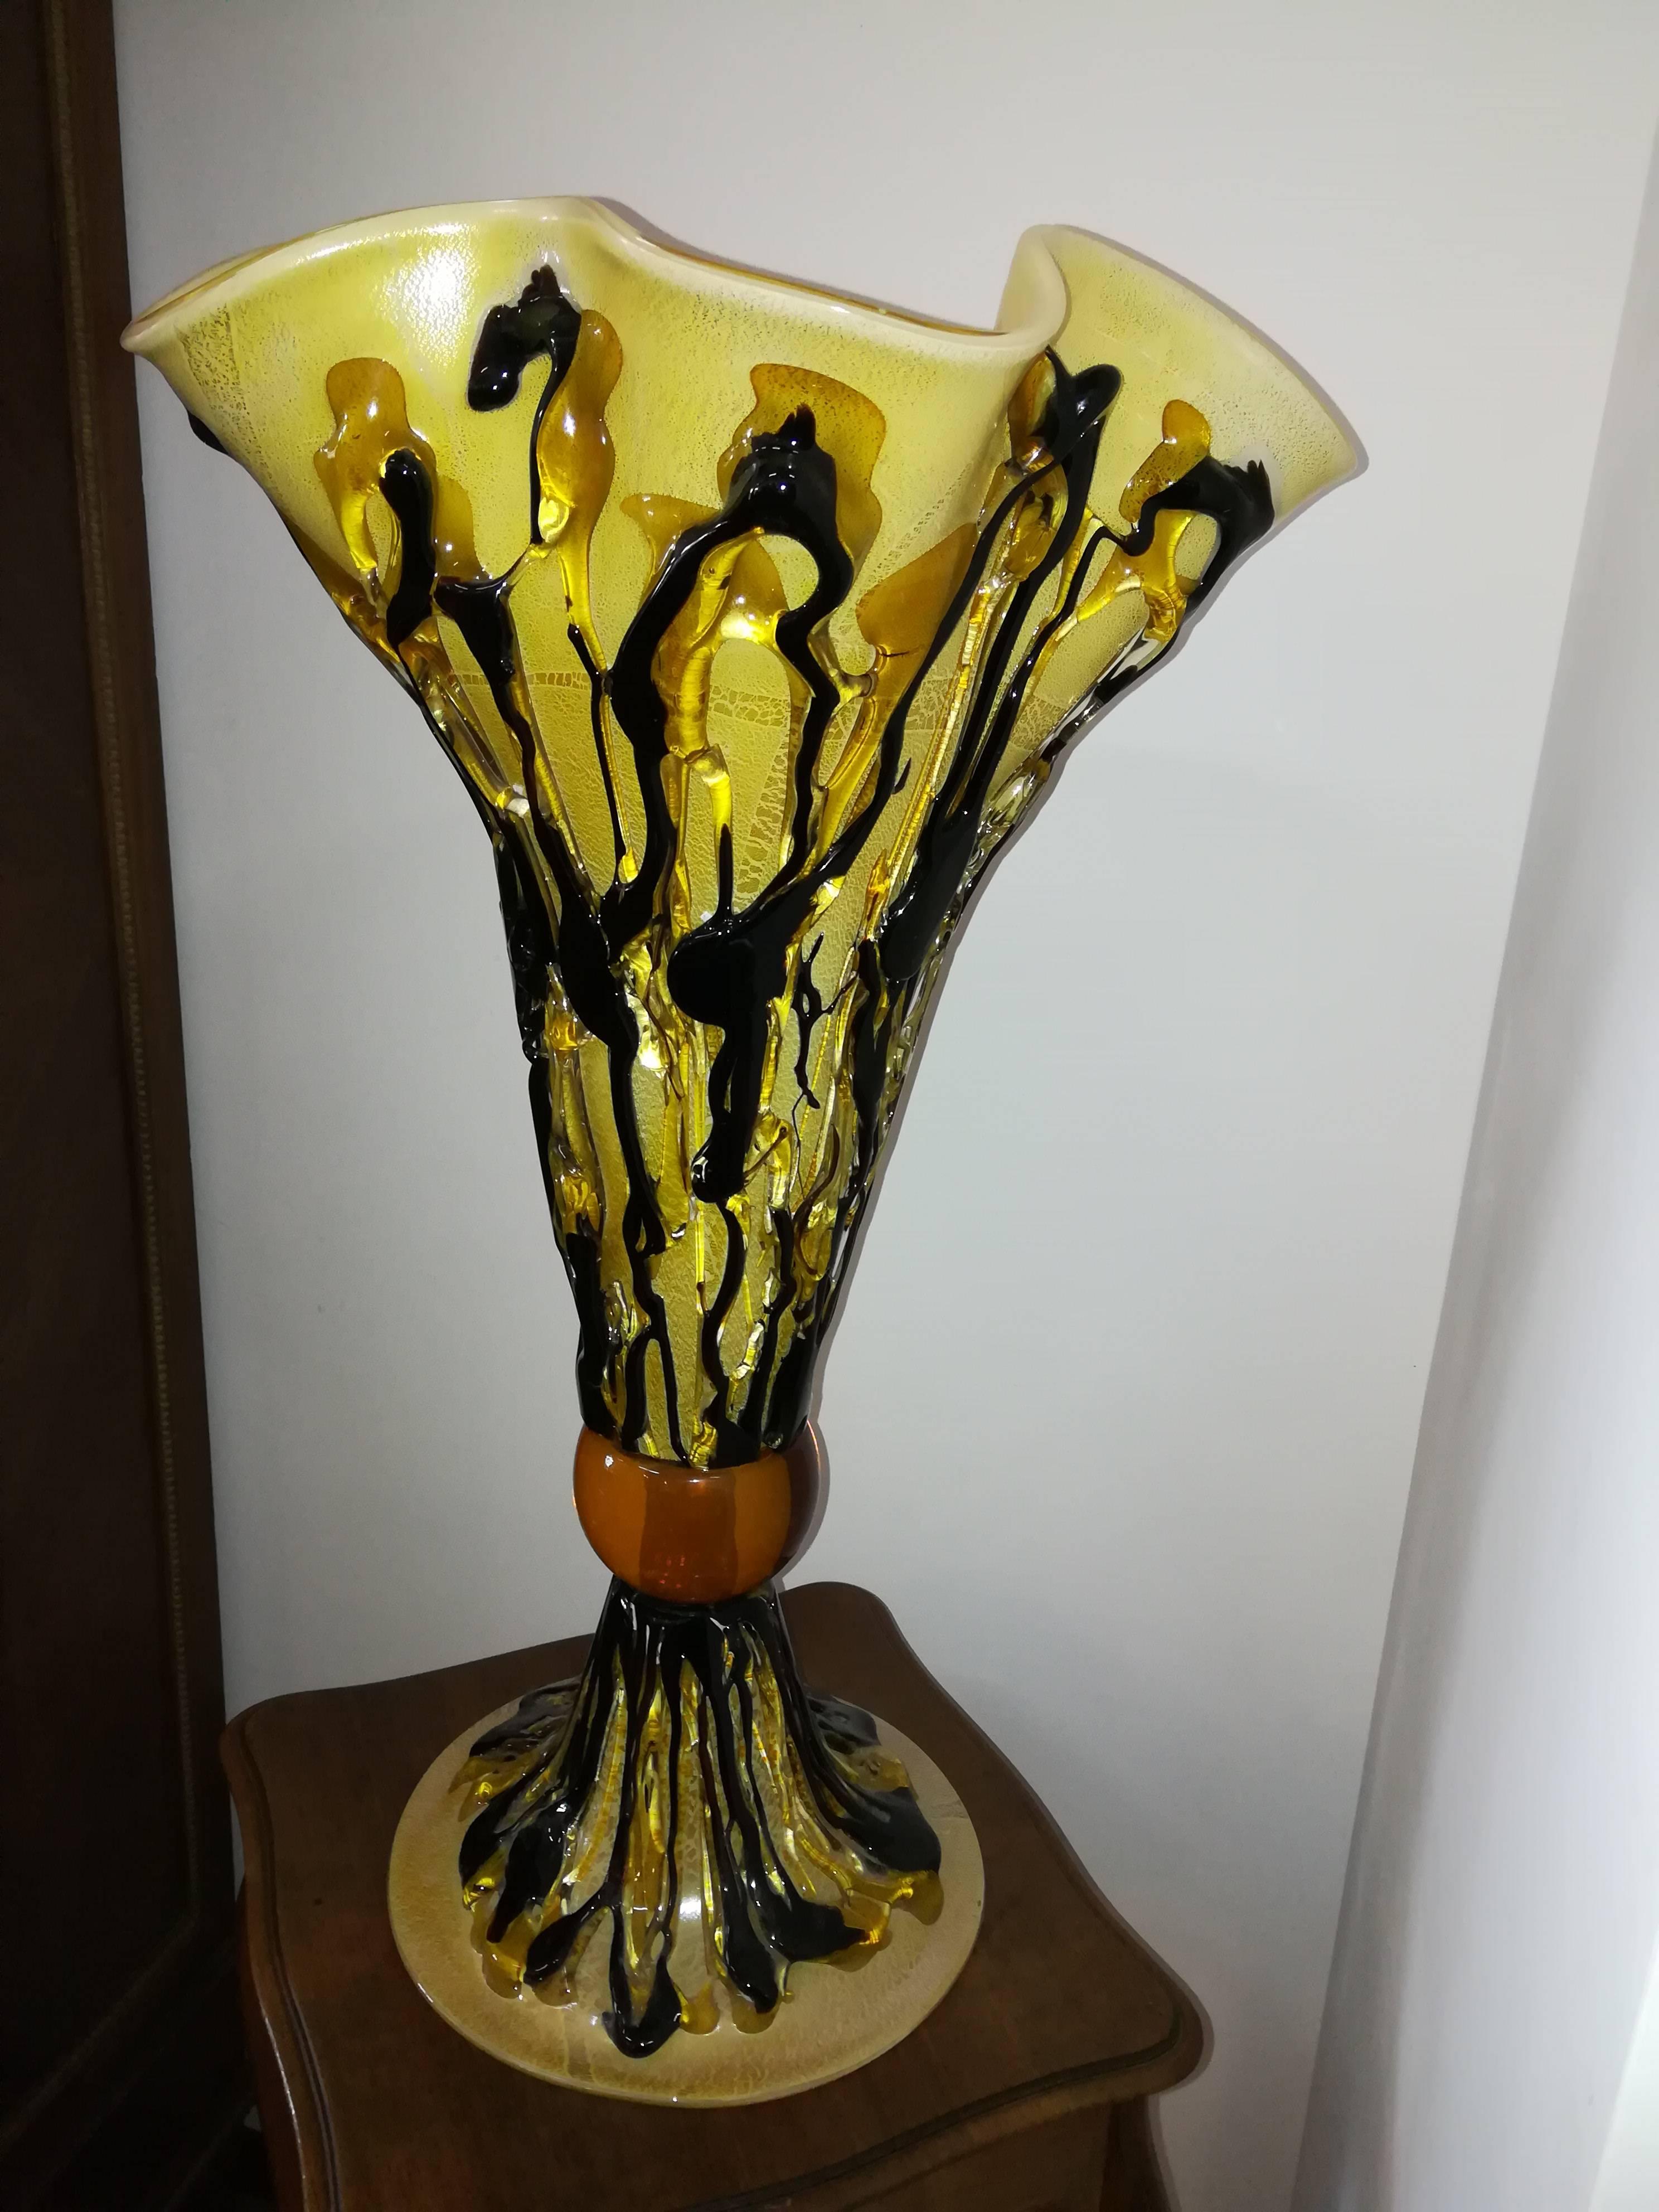 Black Gold Modern Italian Blown Glass Cup In Excellent Condition For Sale In Wyboston Lakes, GB